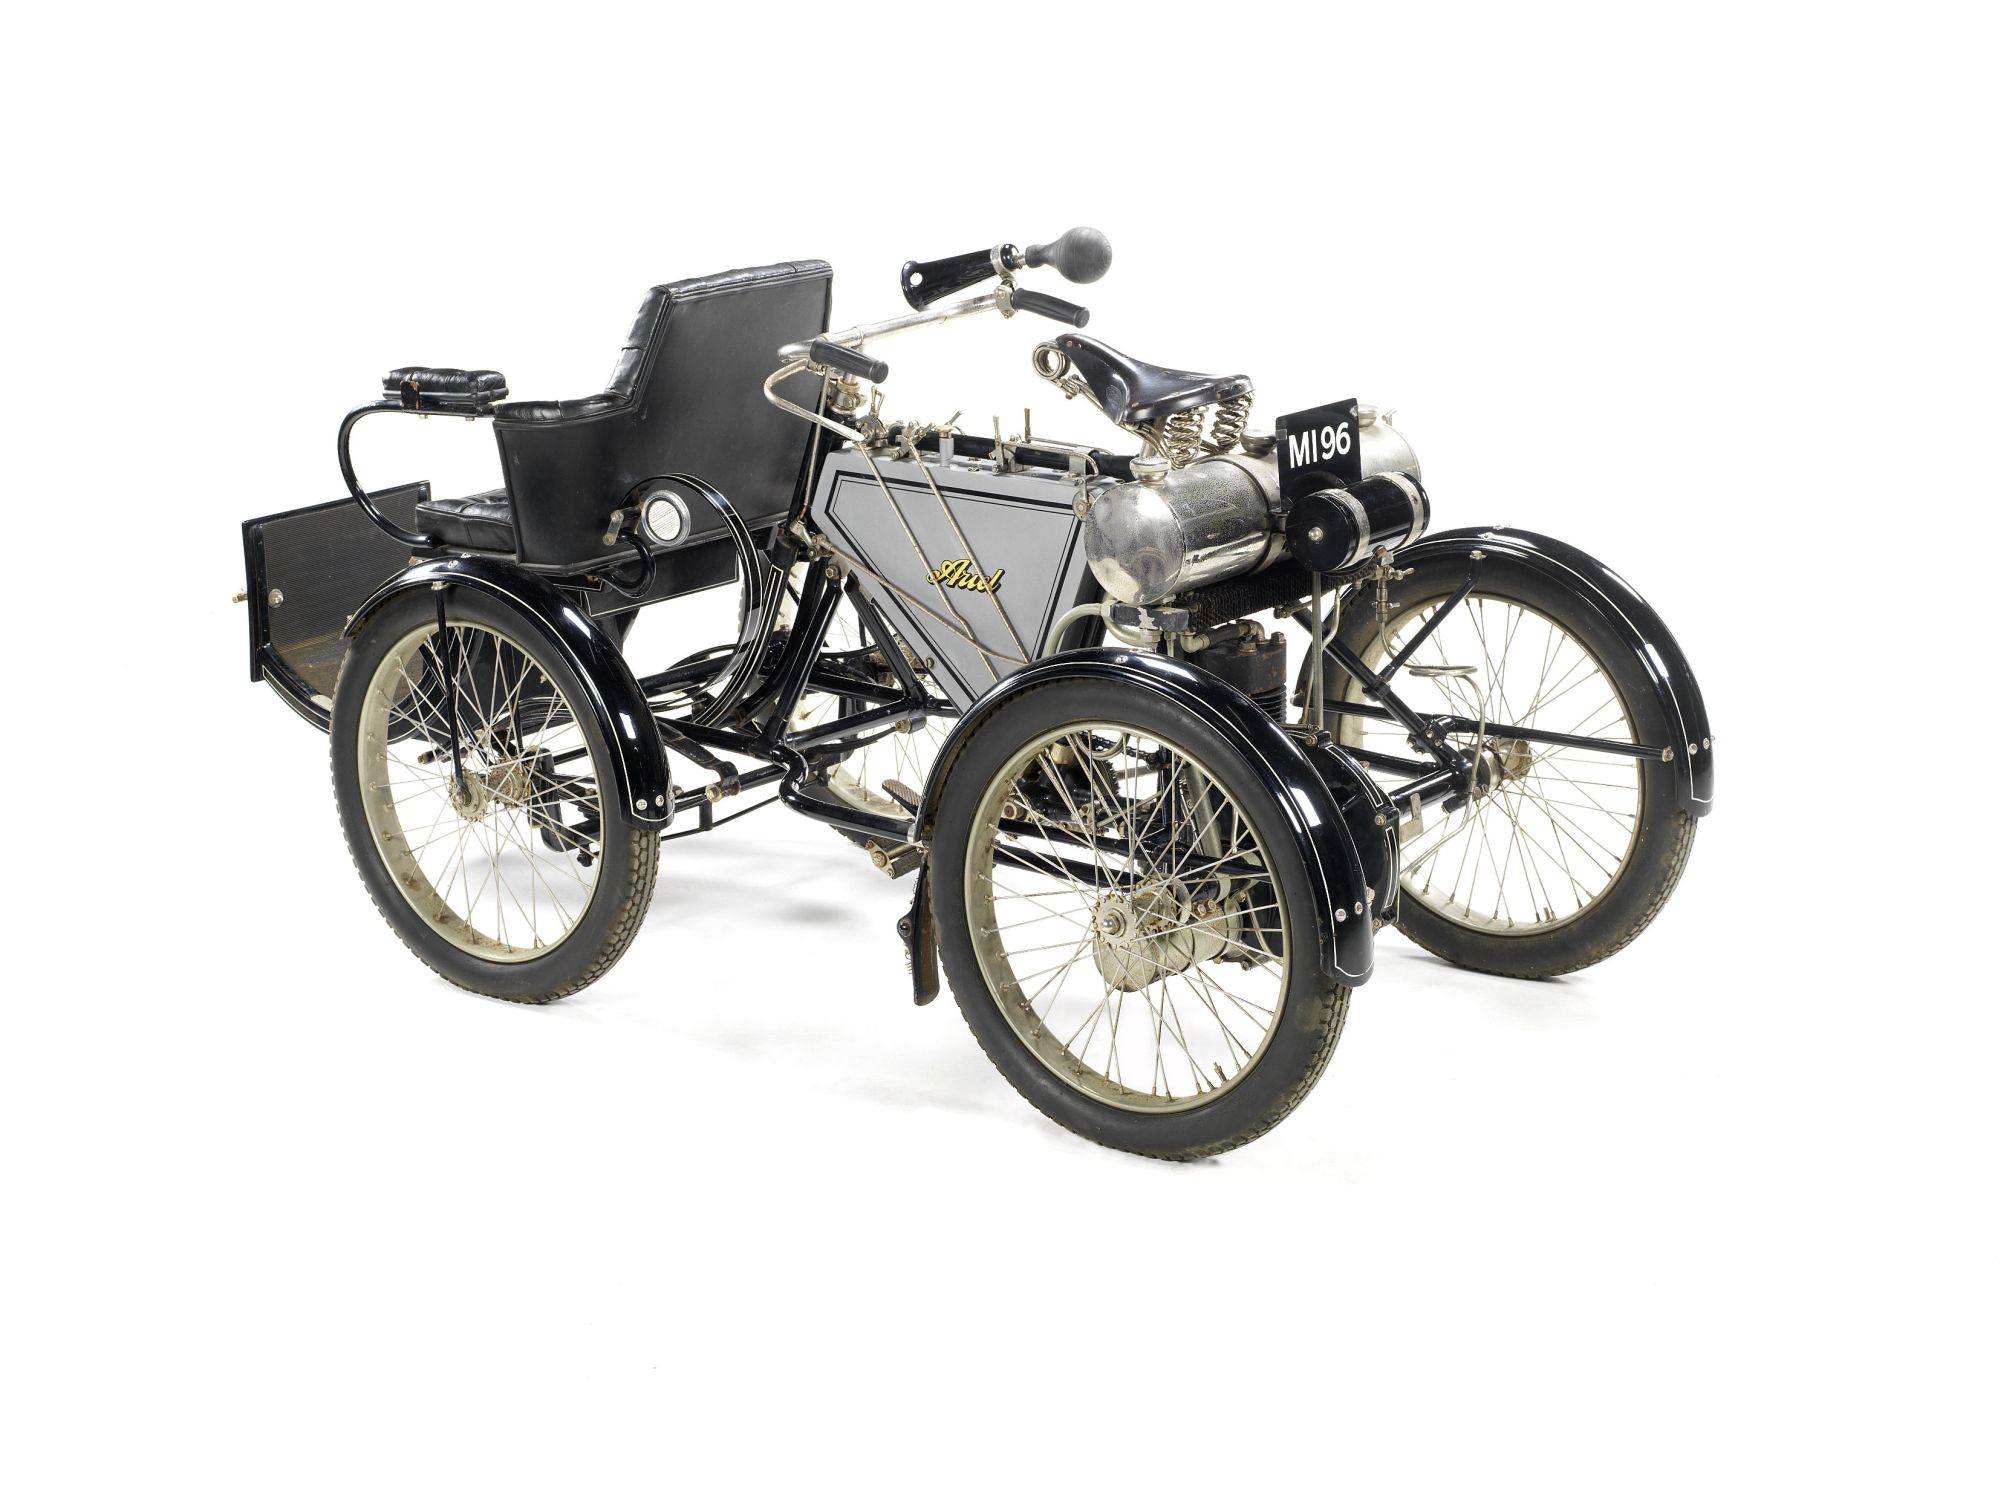 1901 Ariel to be auctioned in the same building it was first sold